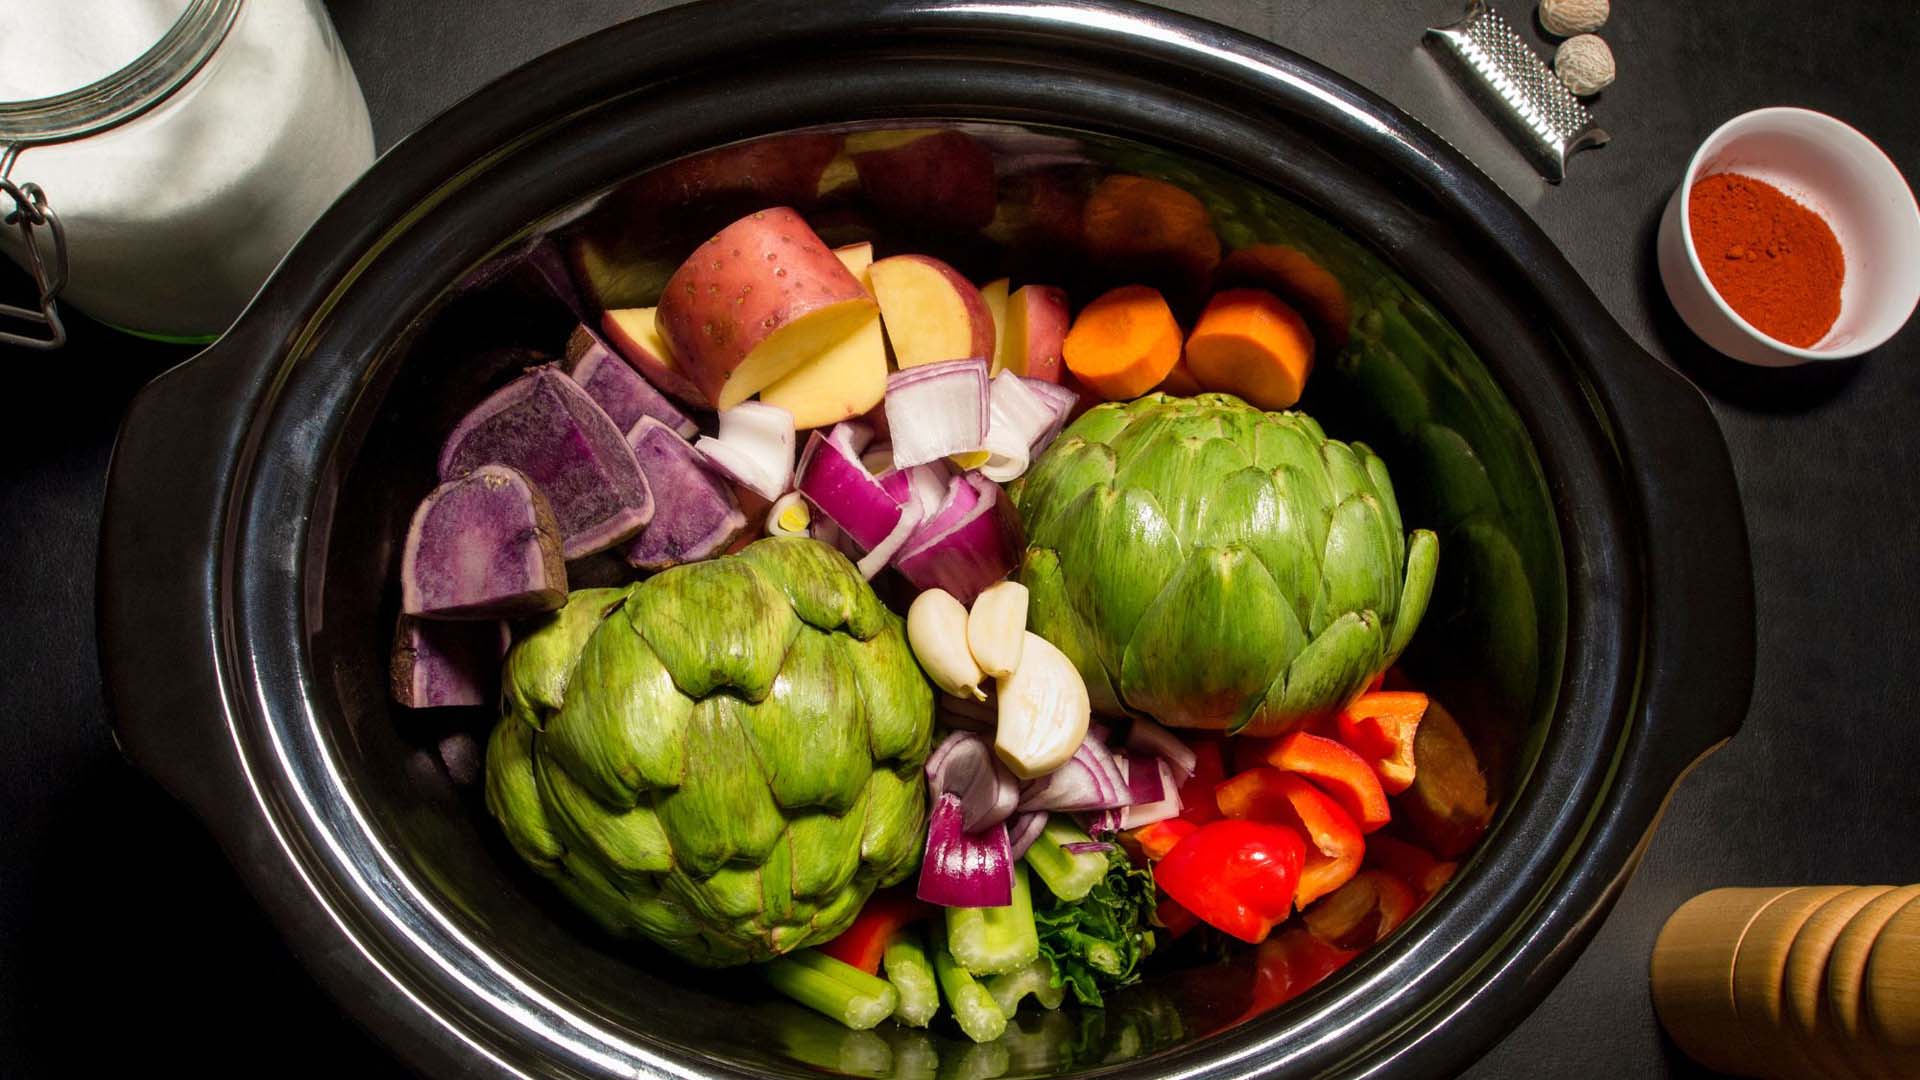 Vegetables including carrots, sweet potatoes and artichoke in a slow cooker